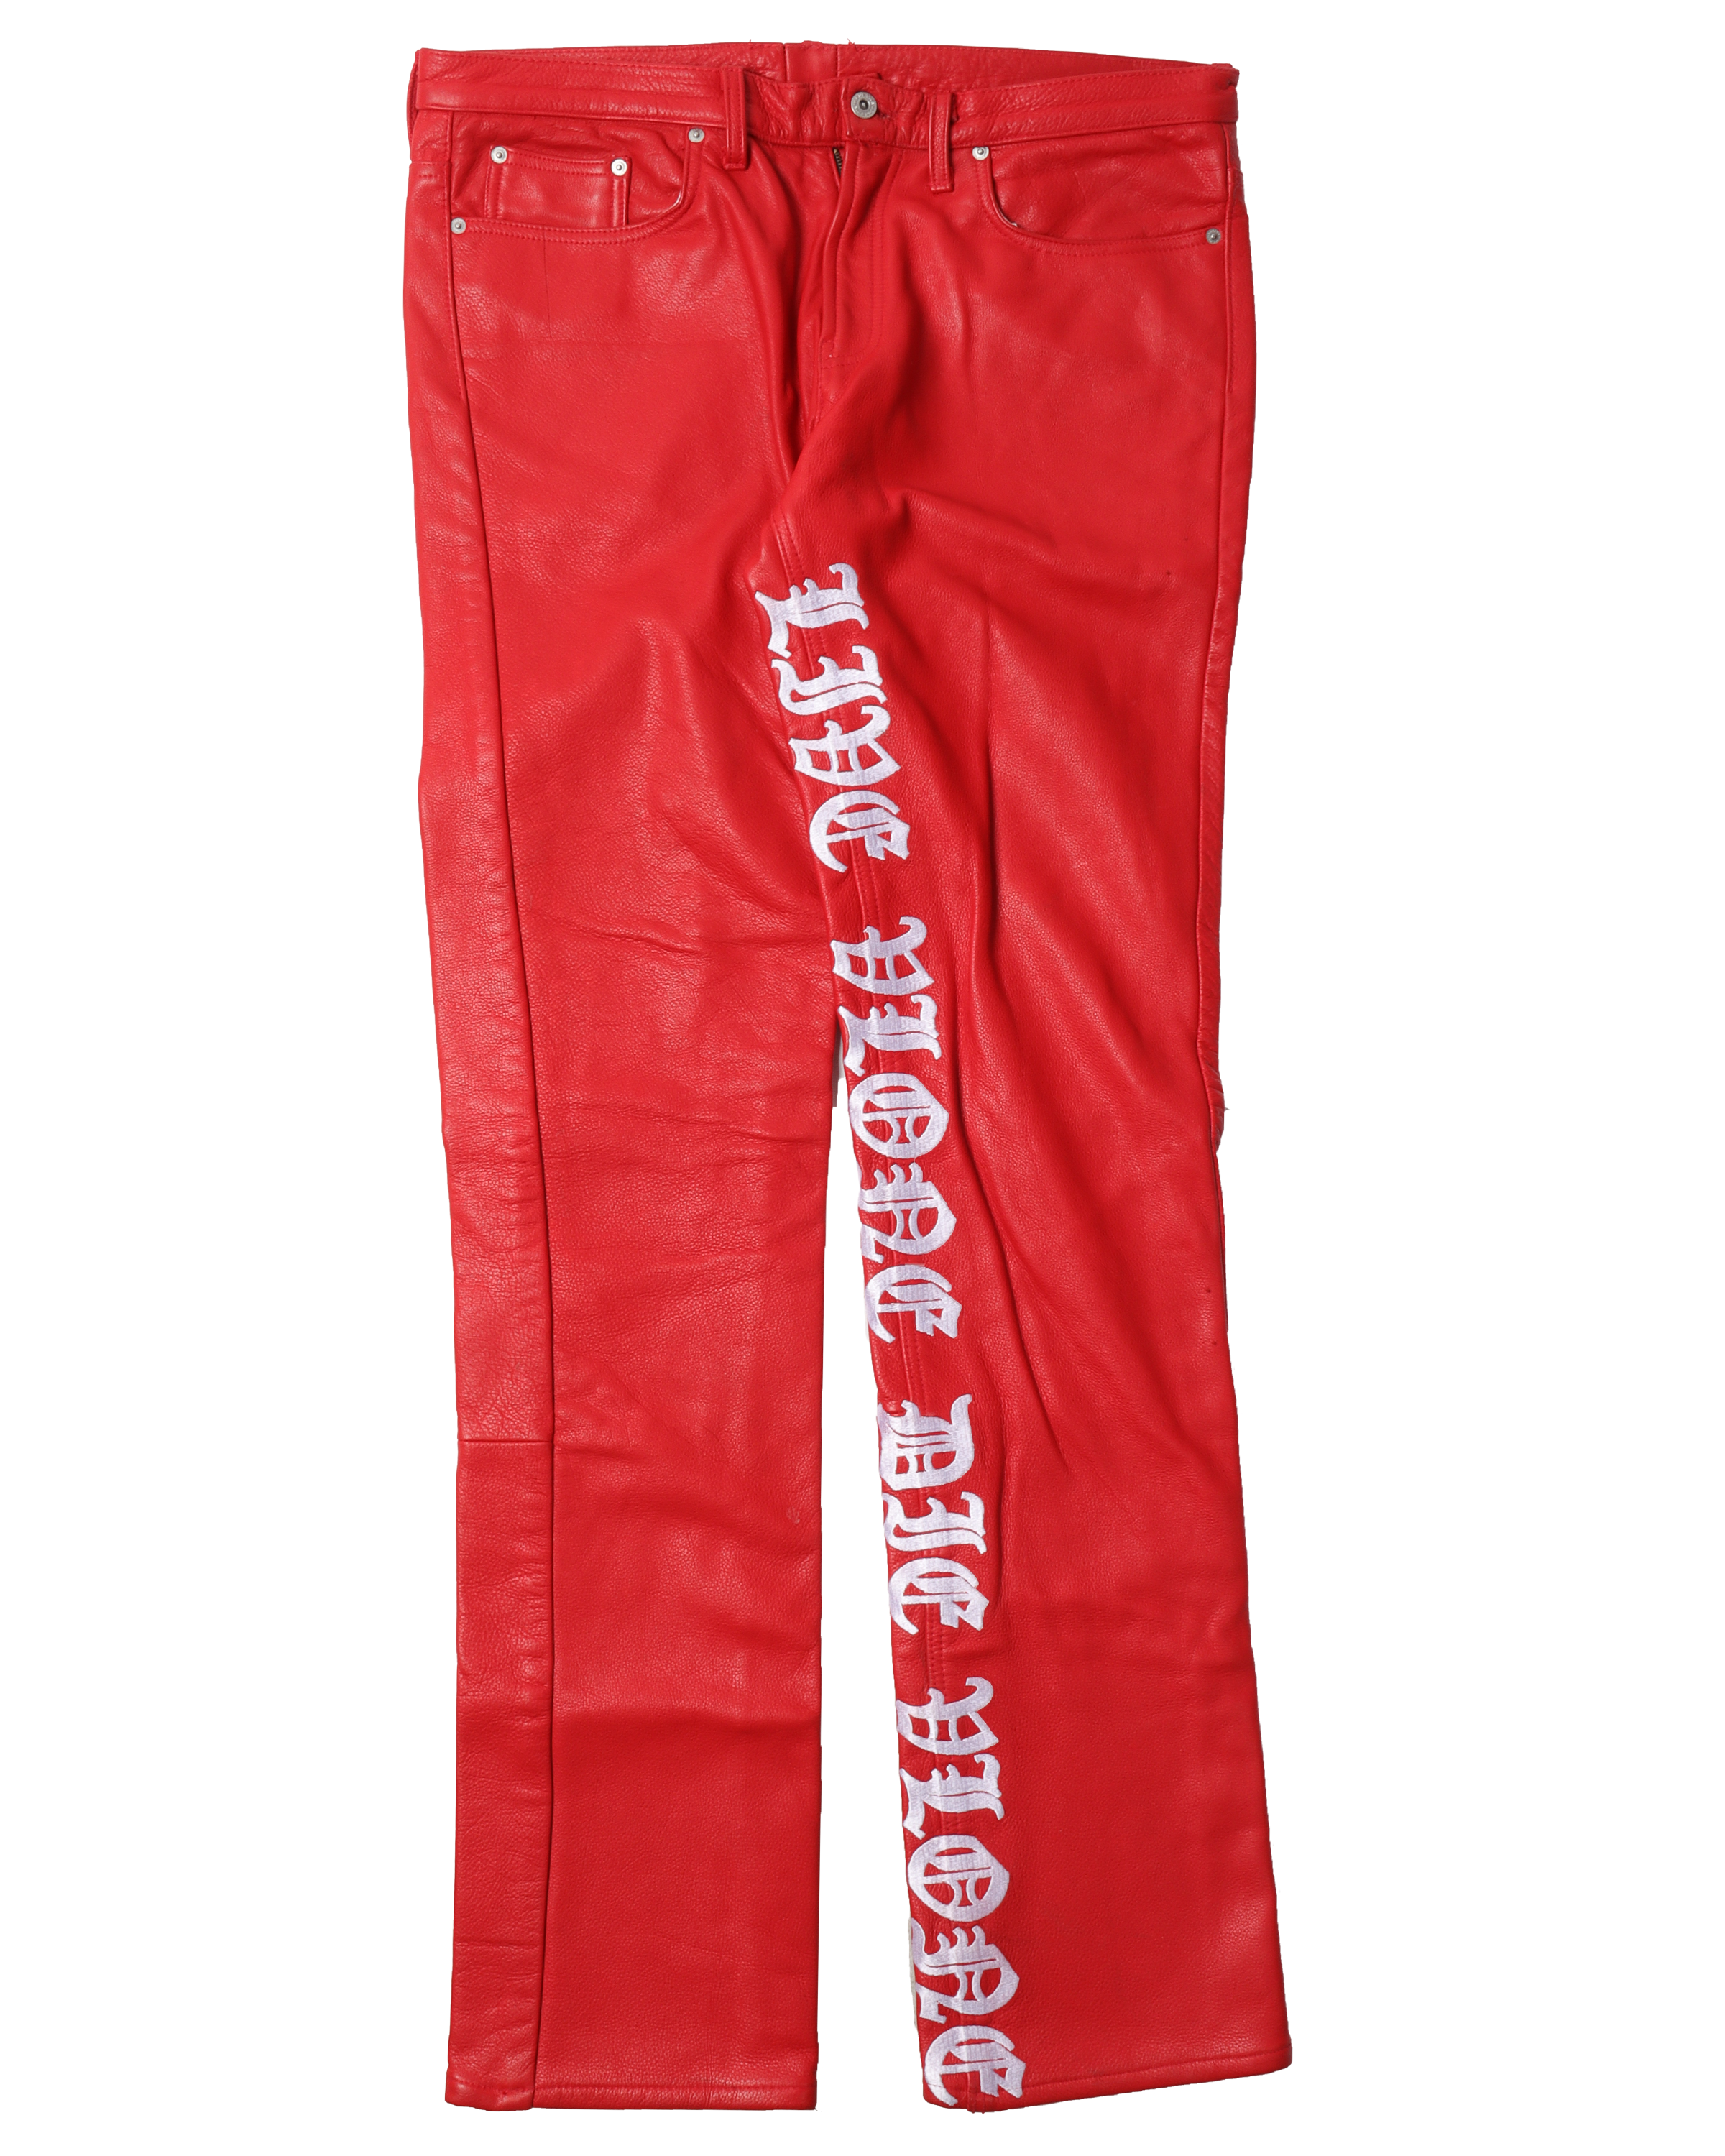 Sample Leather Red Pants